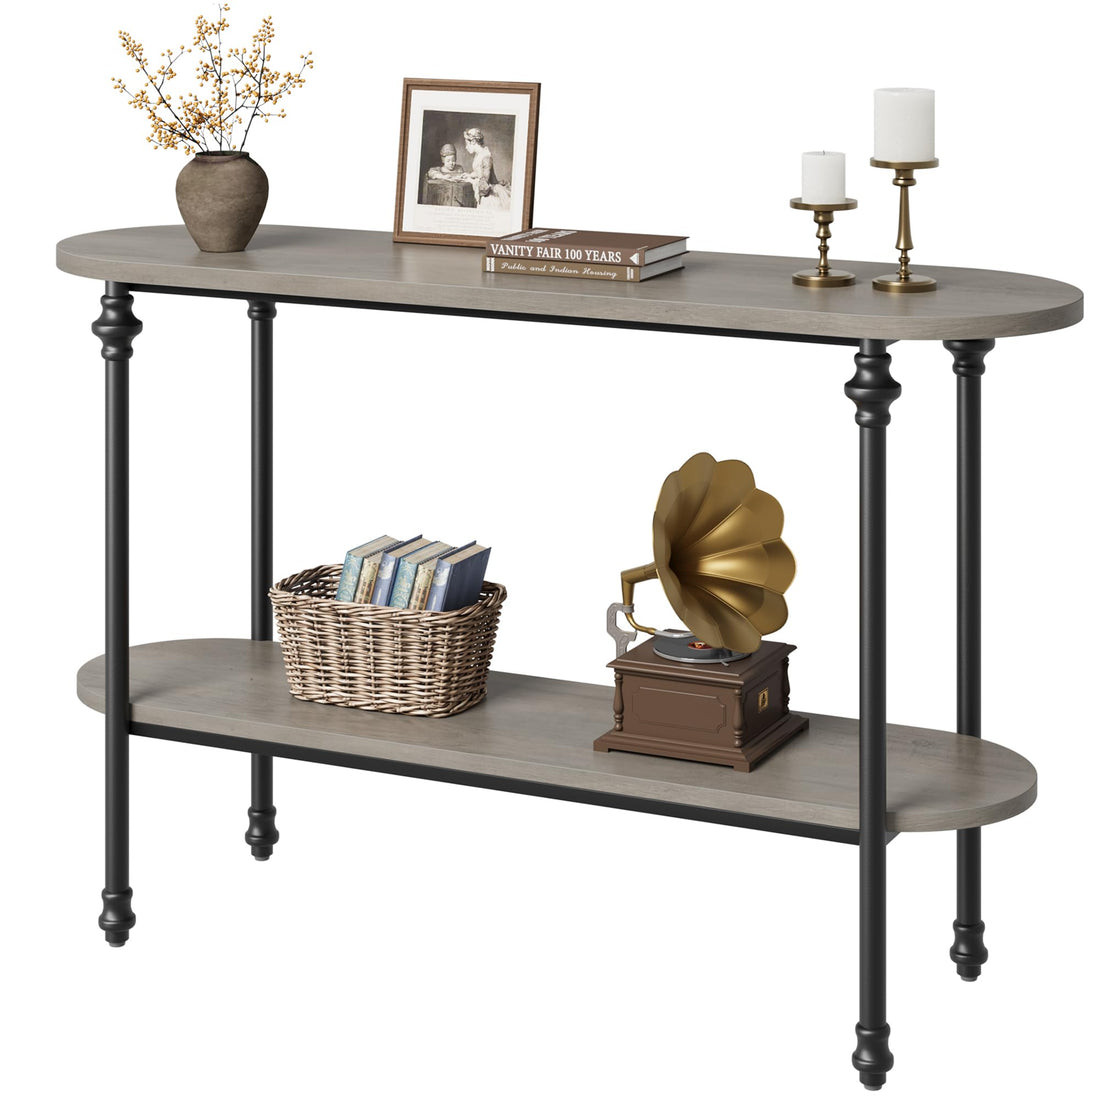 43.3 Inch Console Table, Entryway Table with Storage, 2 Tier Sofa Table with Metal Frame and MDF, Behind Couch Table for Living Room, Hallway, Entryway, Grey